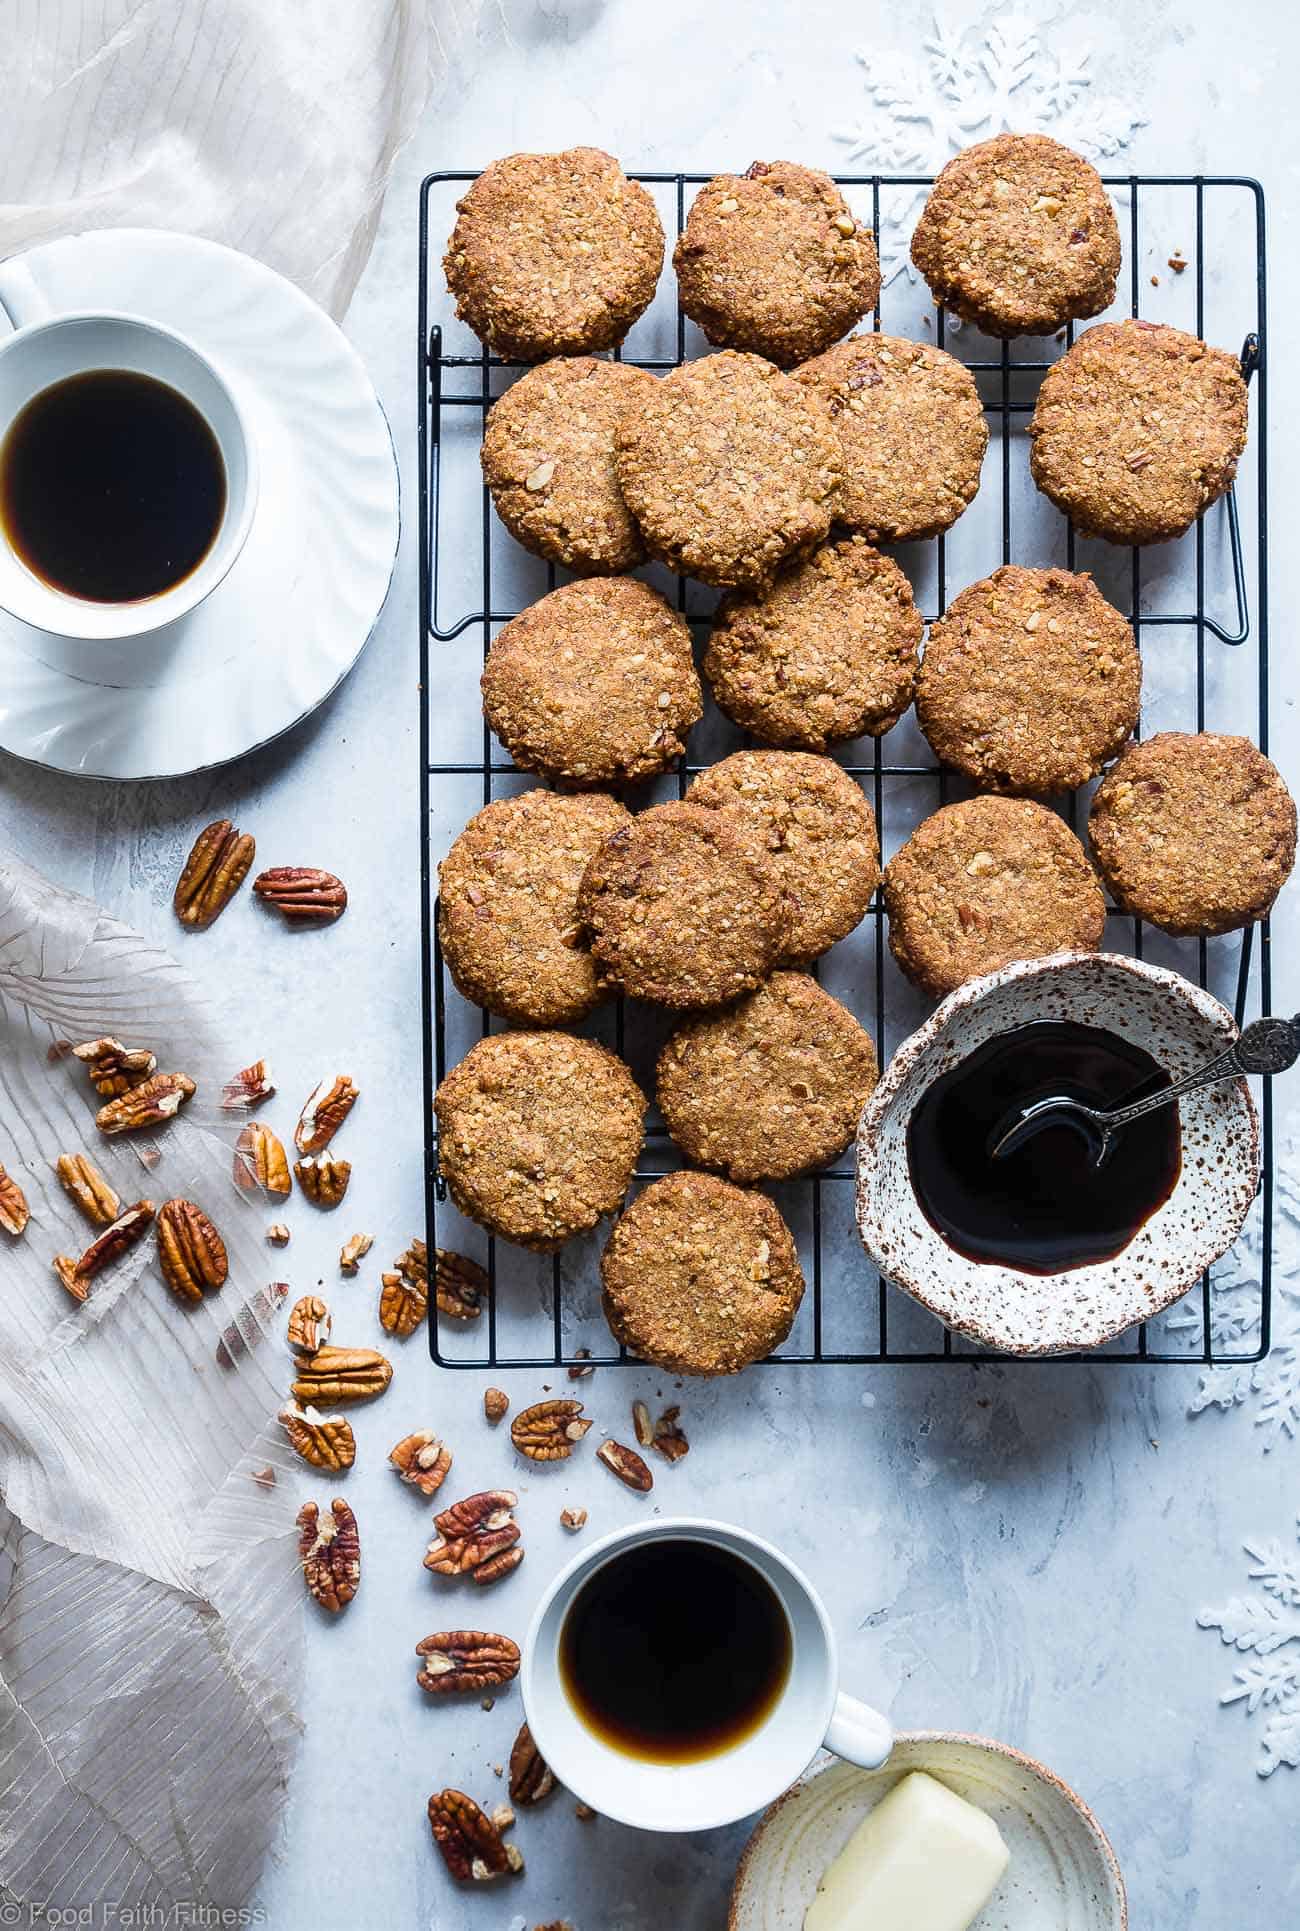 Chewy Butter Pecan Cookies - These 6 ingredient, gluten free Butter Pecan Cookies are perfectly crisp on the outside and chewy on the inside! A paleo and vegan friendly, dairy-free treat for the holidays! | Foodfaithfitness.com | @FoodFaithFit